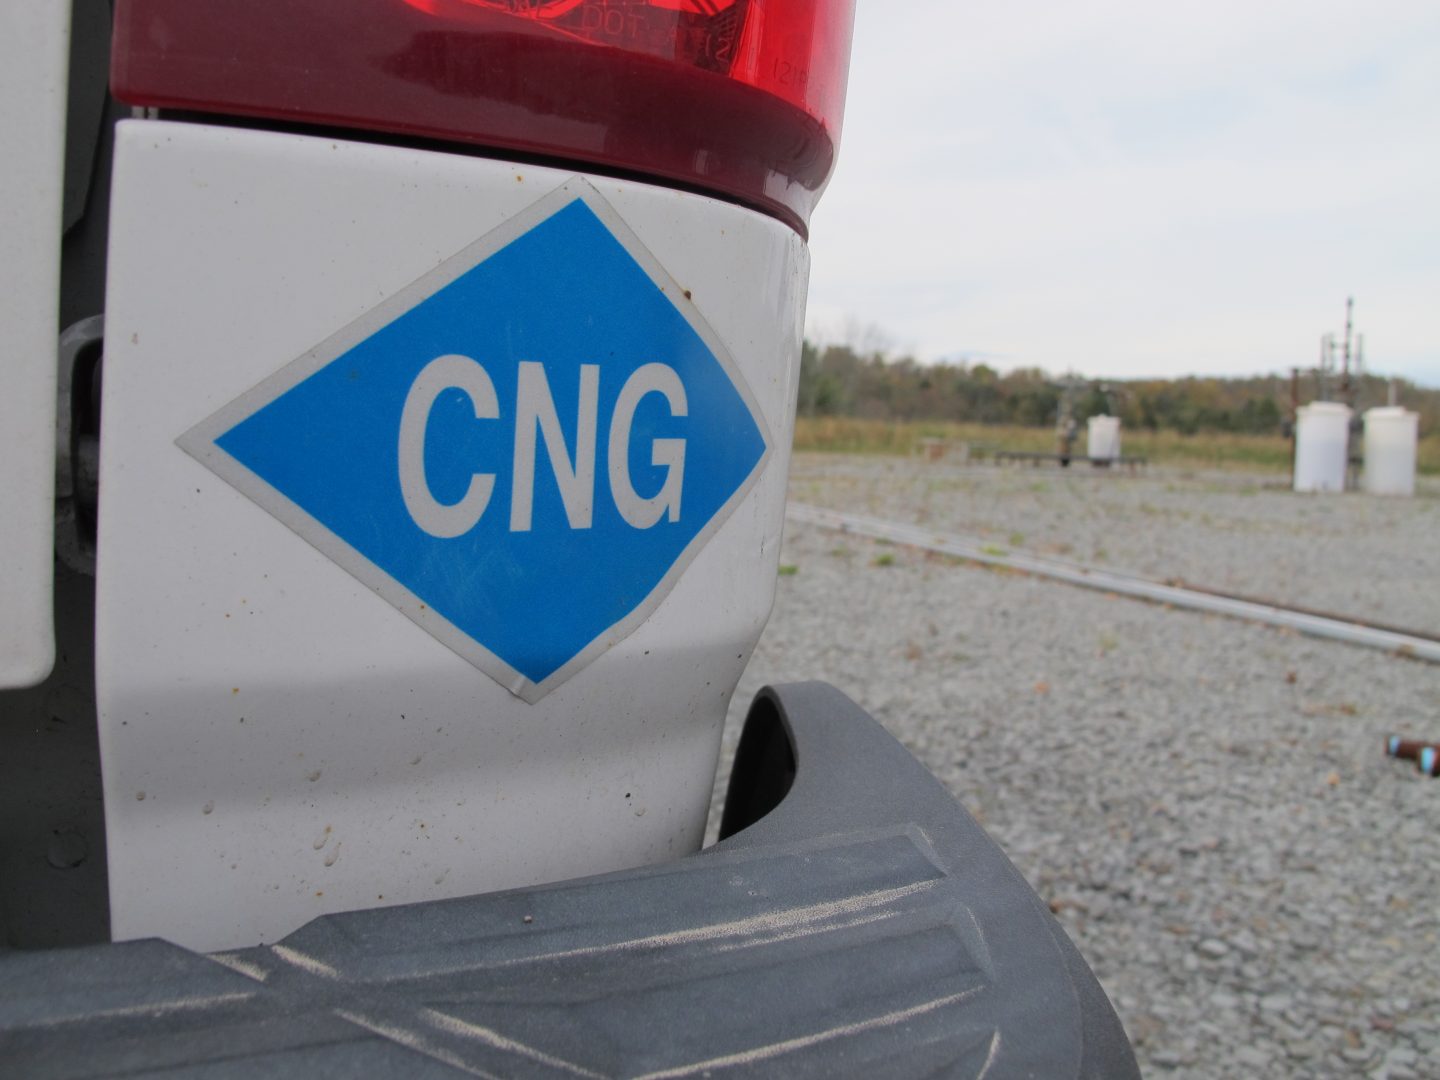 A pickup truck that runs on compressed natural gas (CNG).